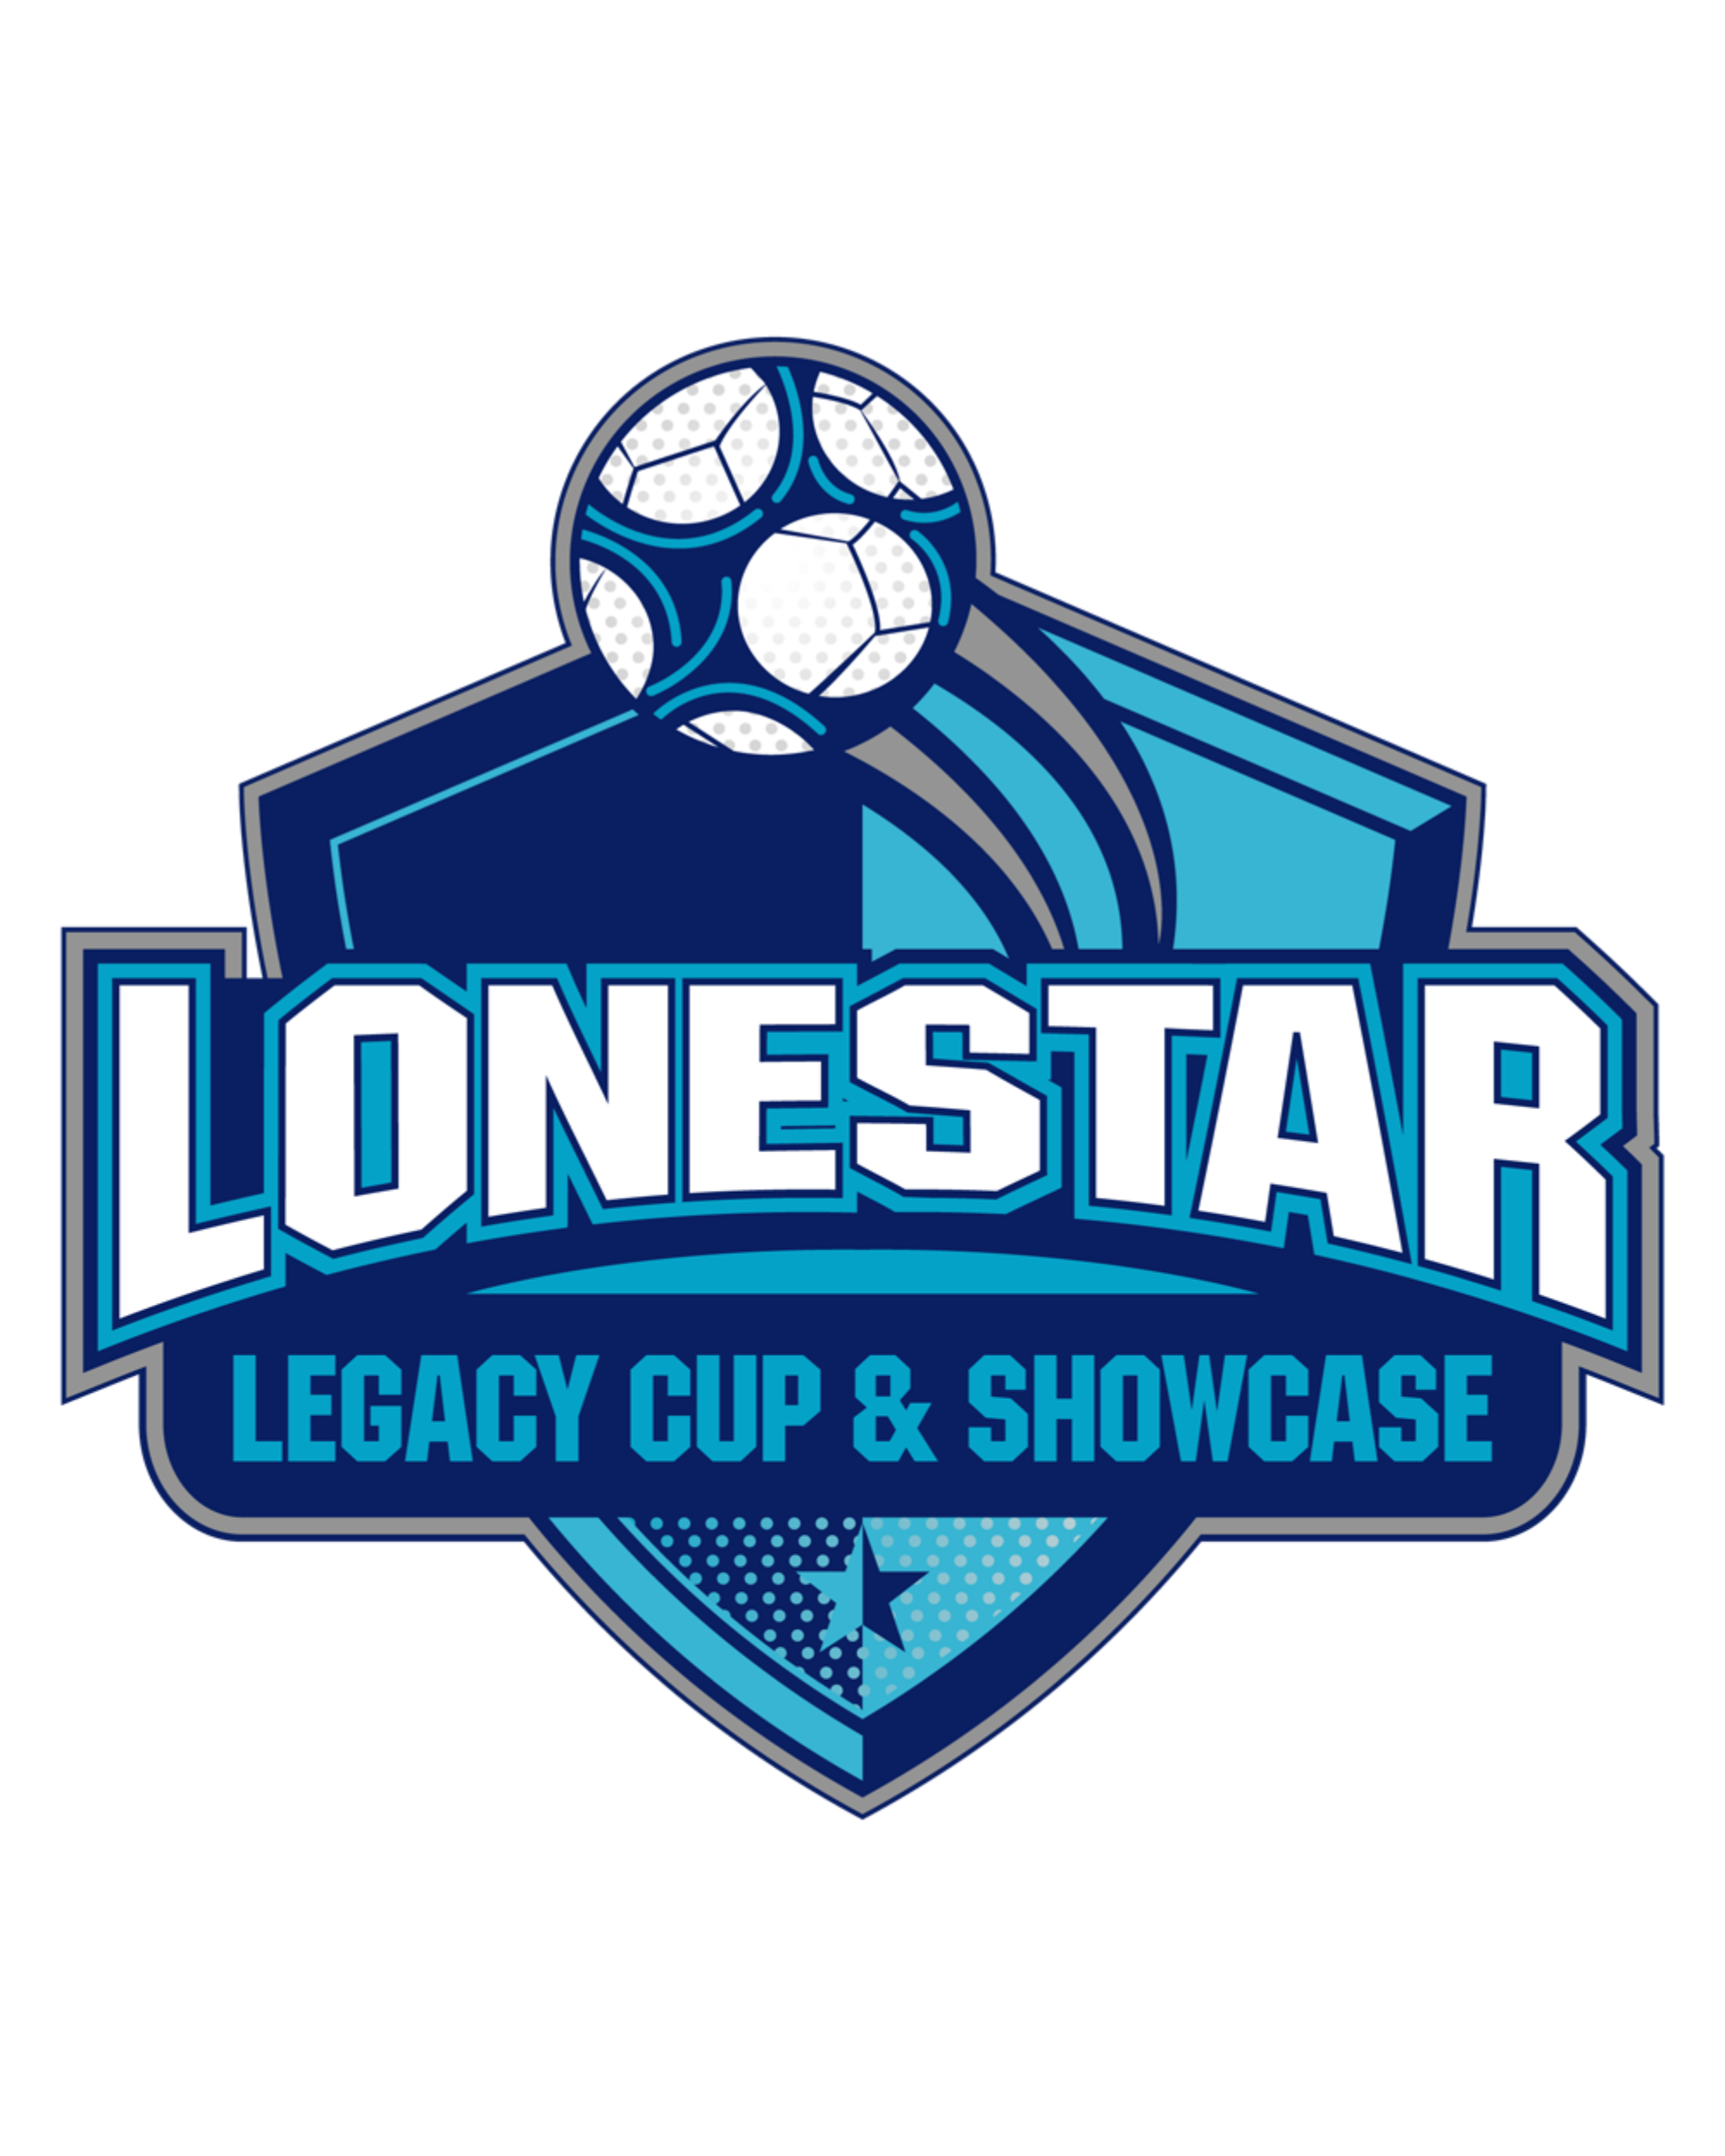 Lonestary Legacy Cup & Showcase transparent